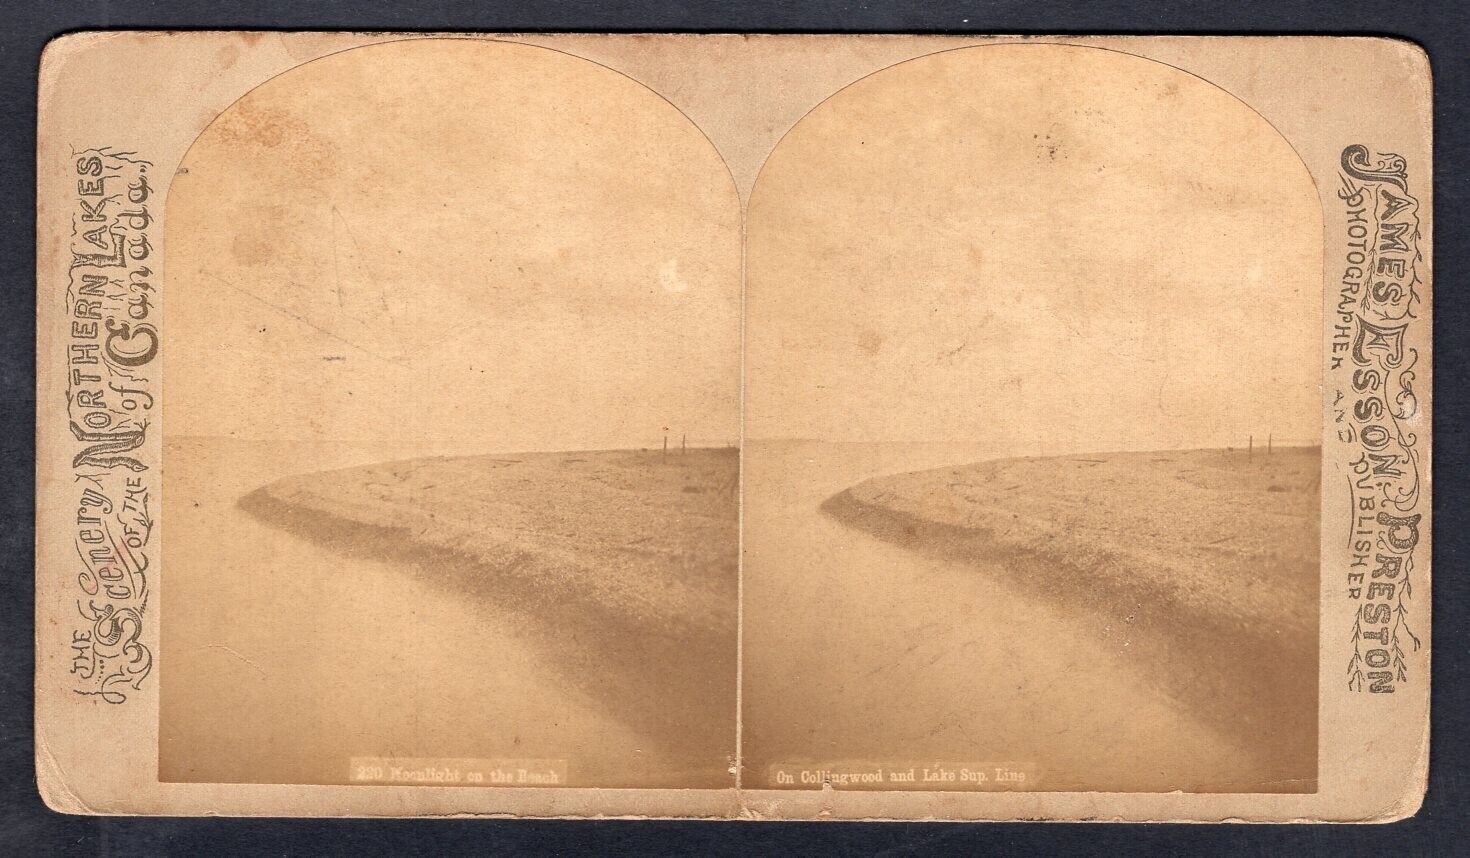 CANADA 1880s Stereoview Photo by Esson. View of Beach Lake Huron in Collingwood